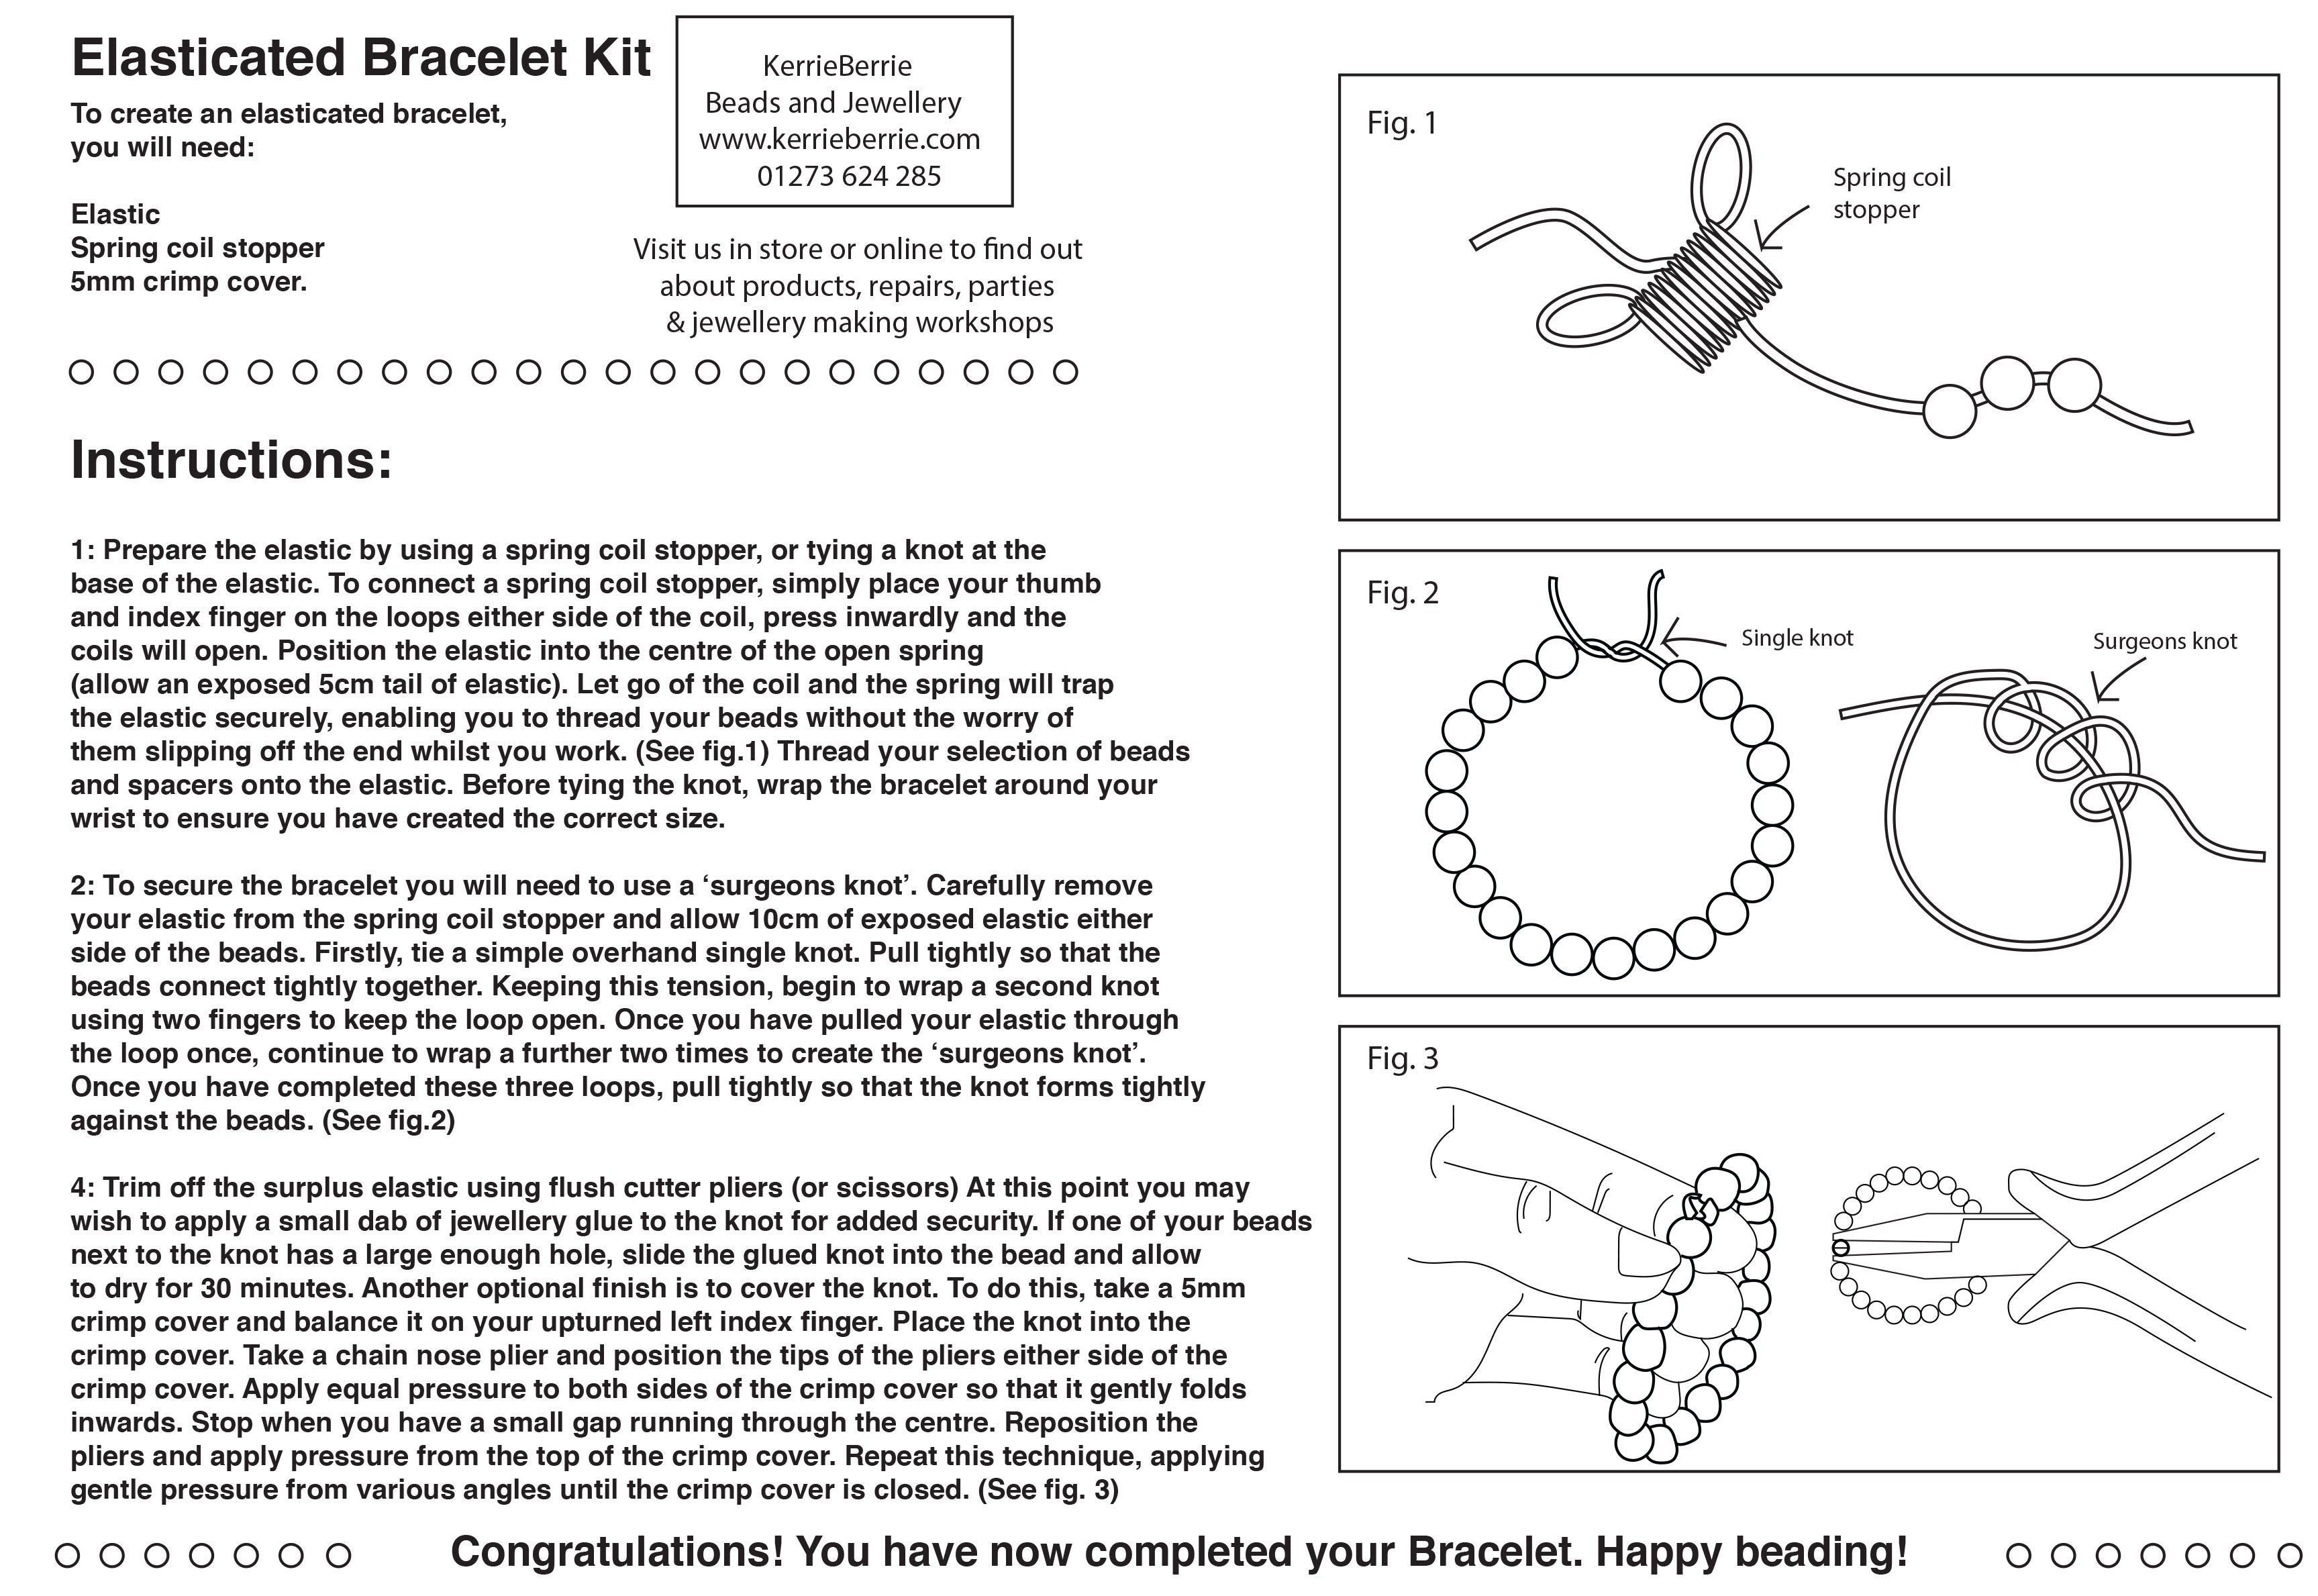 The Happiness Stretchy Bracelet Making Kit